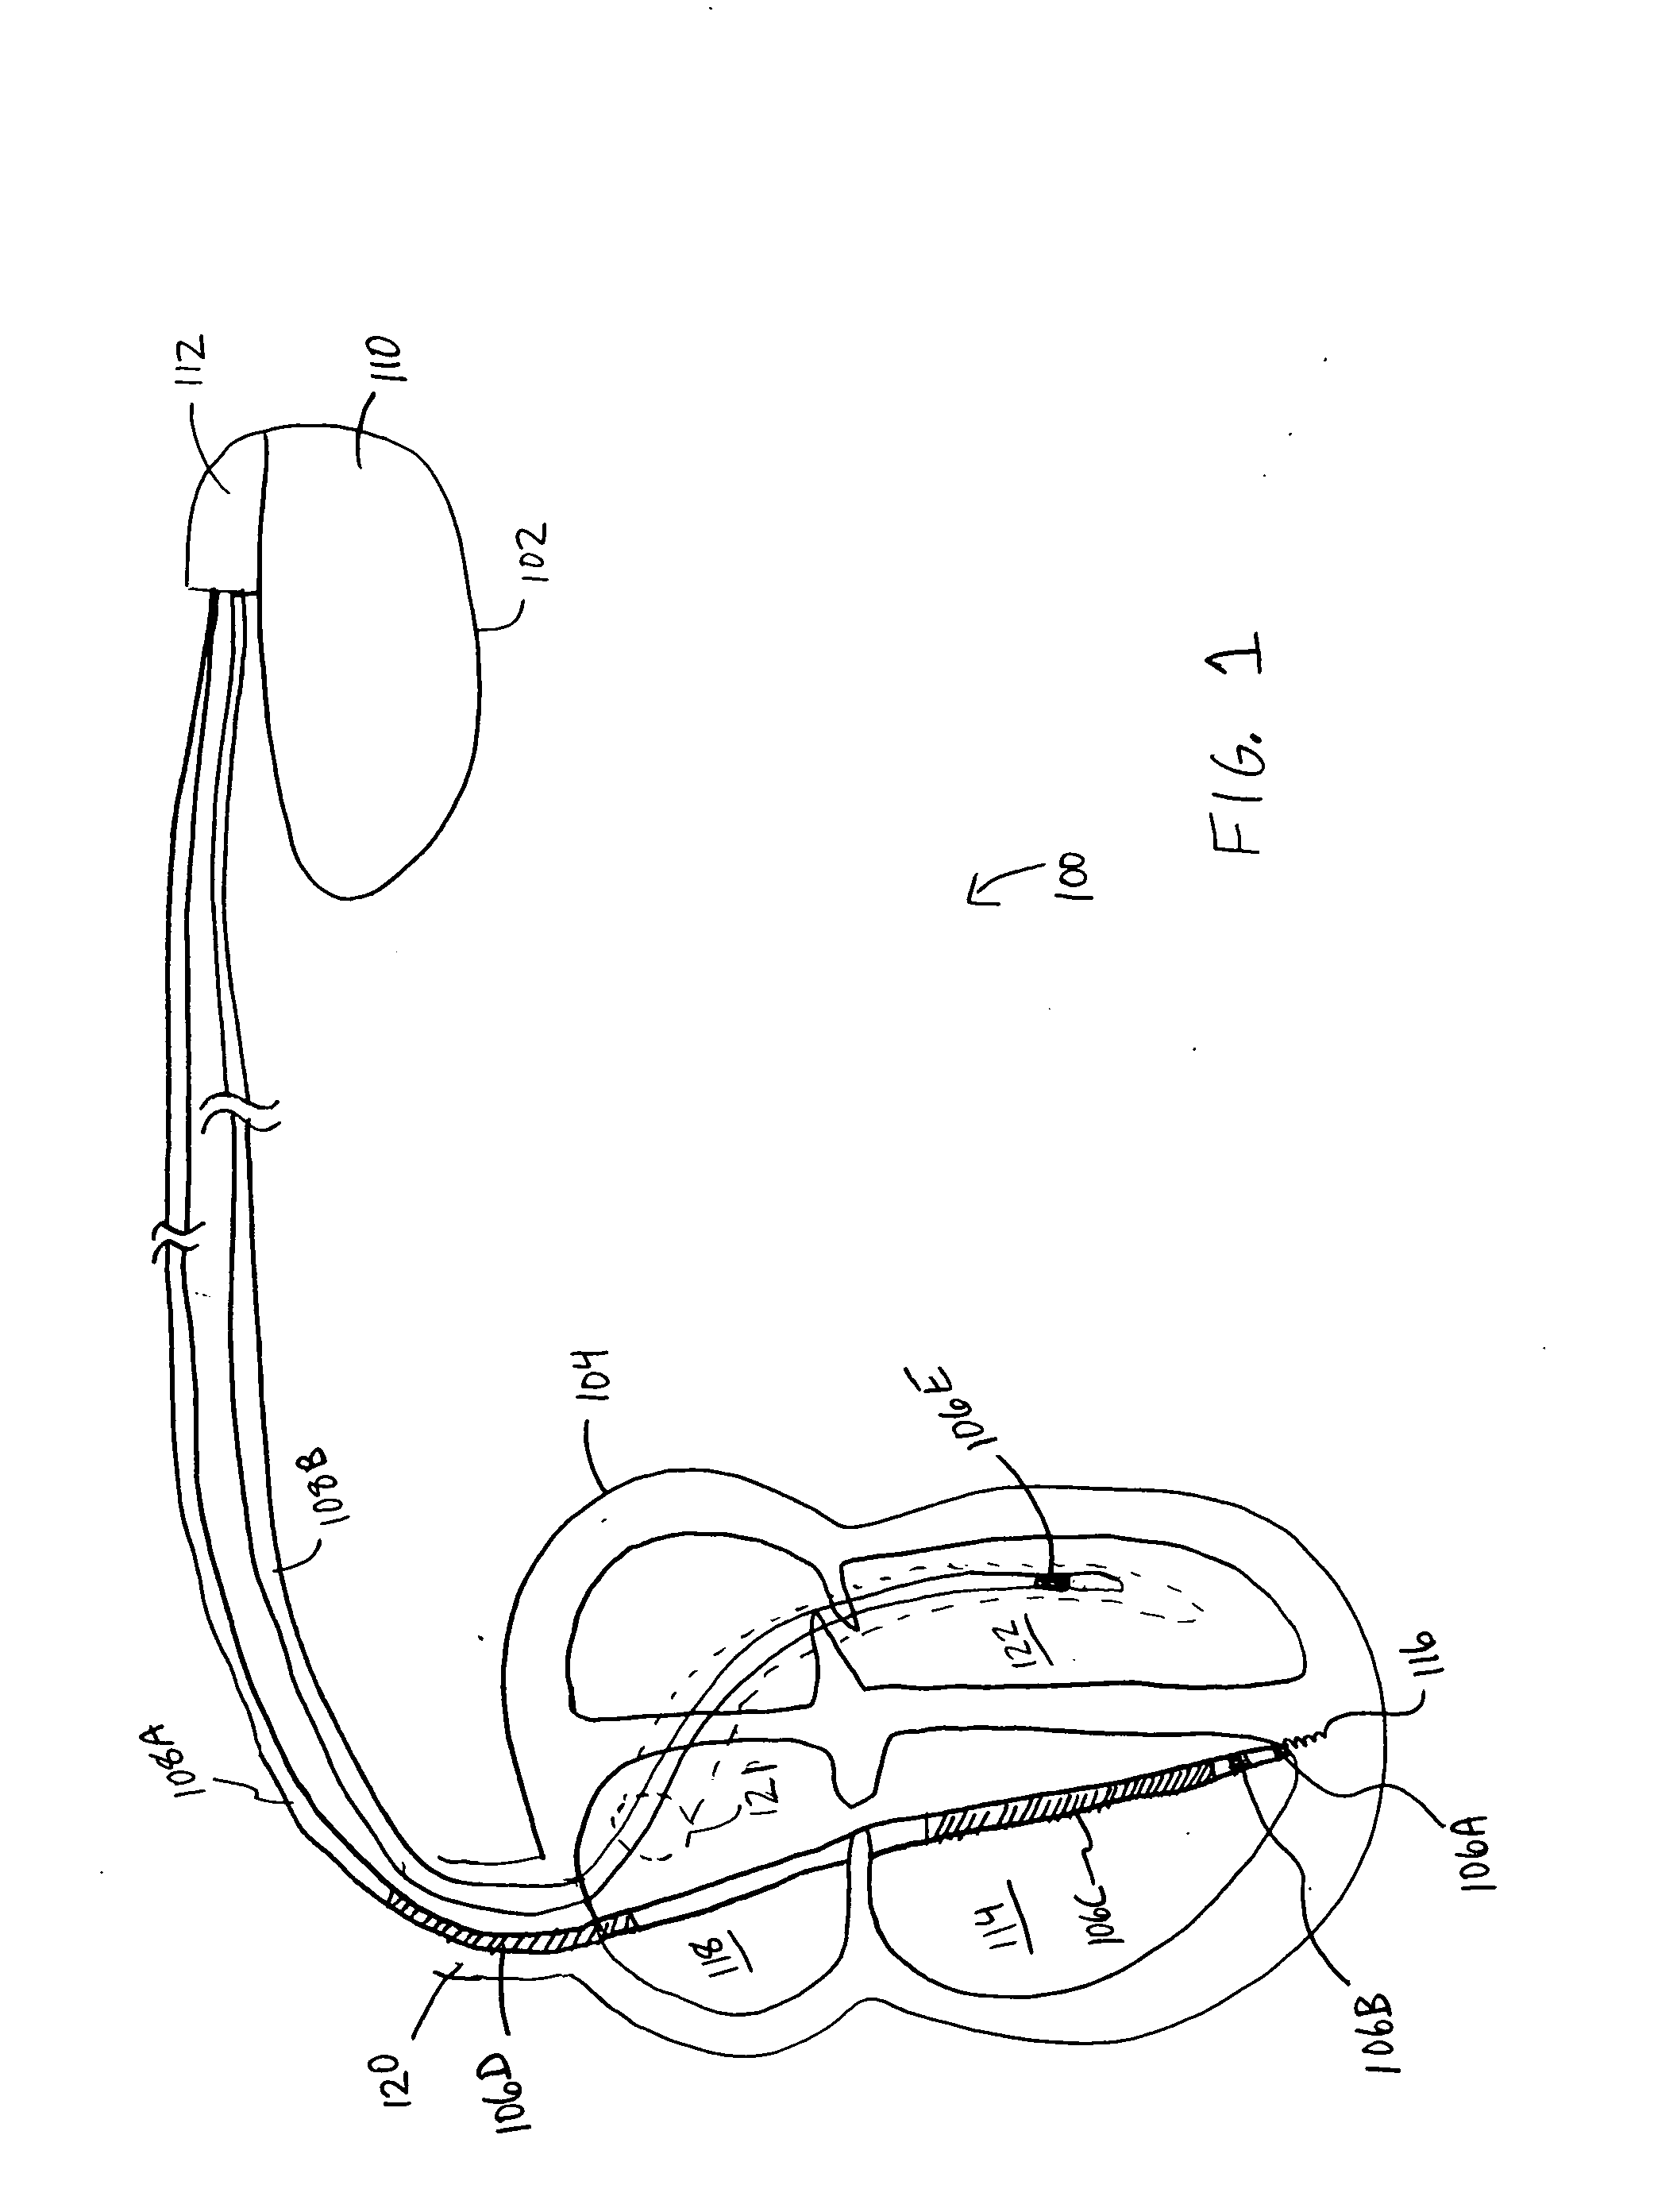 Semiconductor-gated cardiac lead and method of use